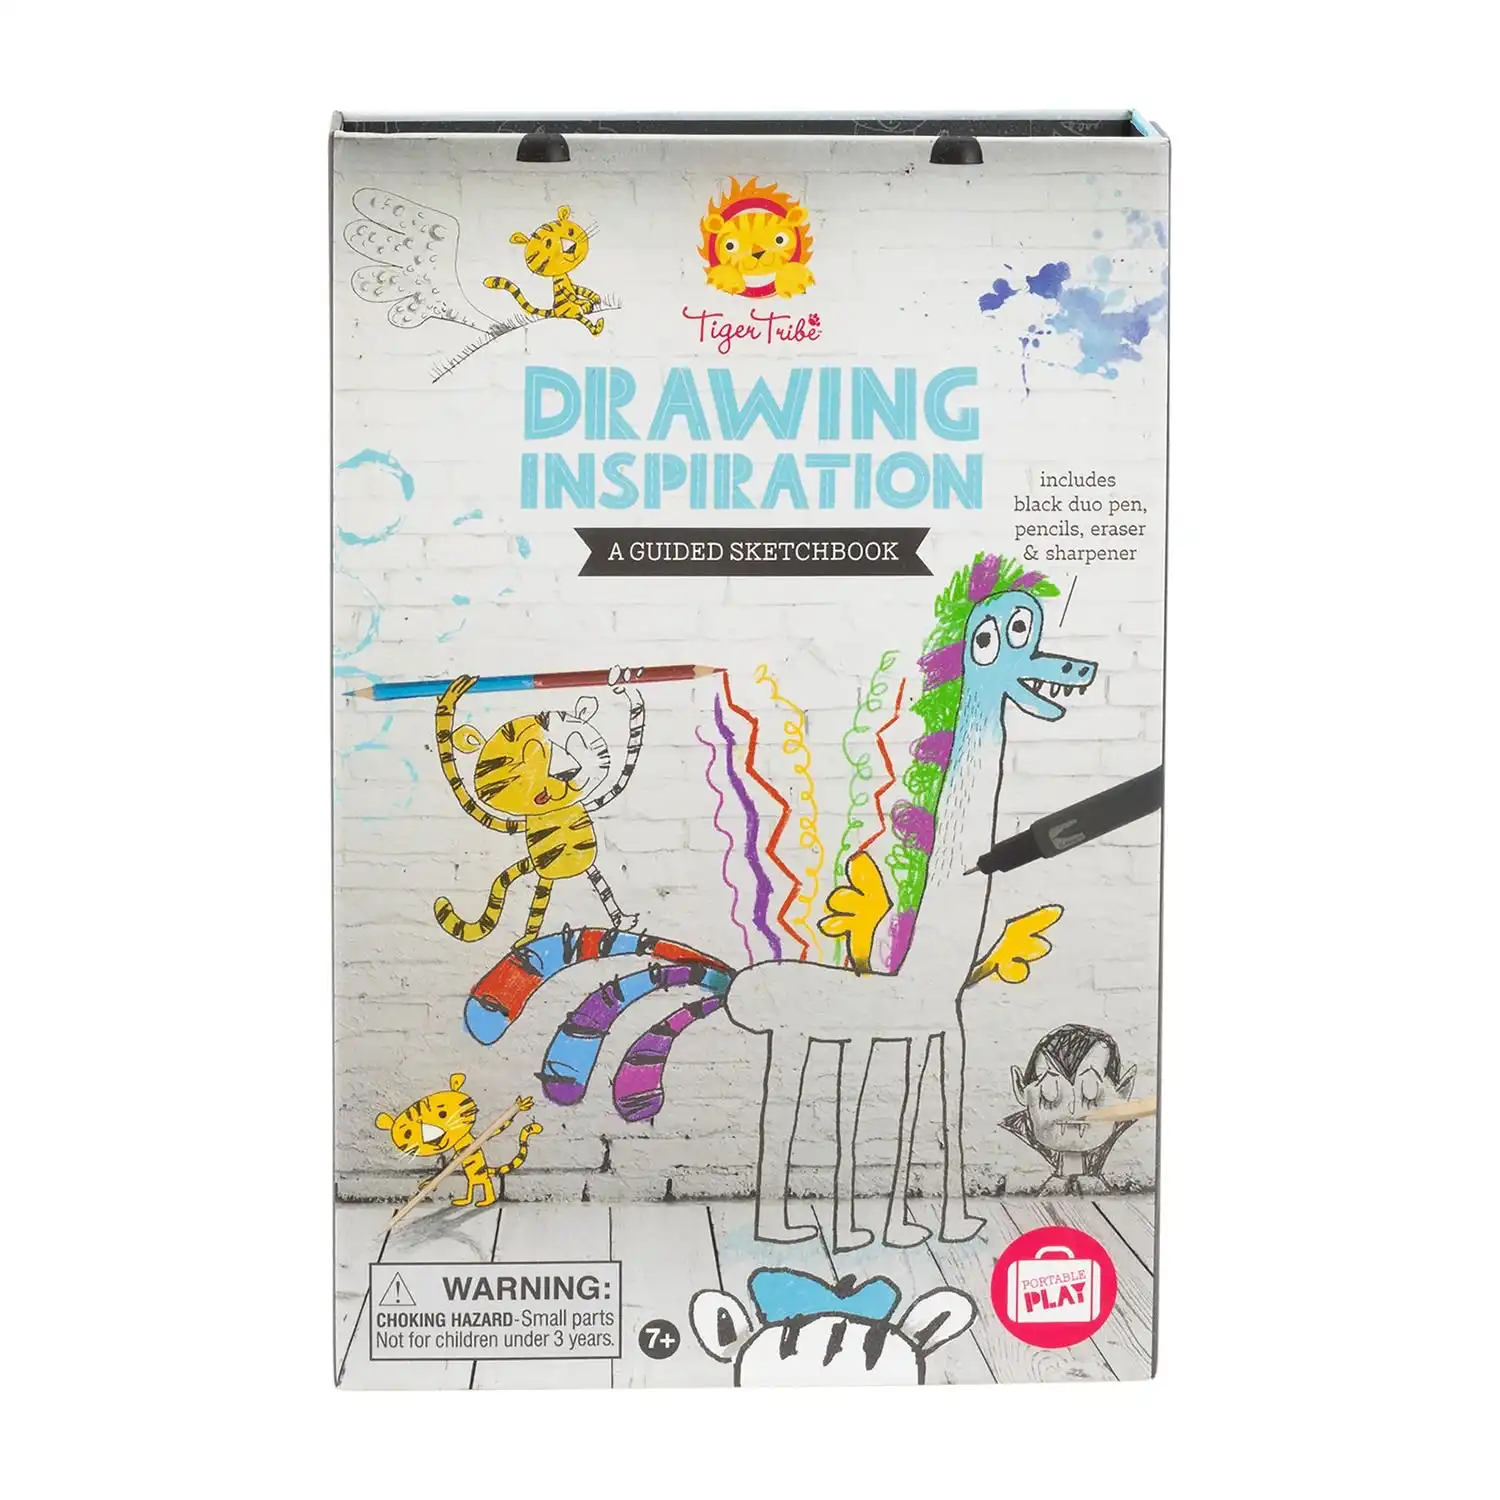 Drawing Inspiration - A Guided Sketchbook